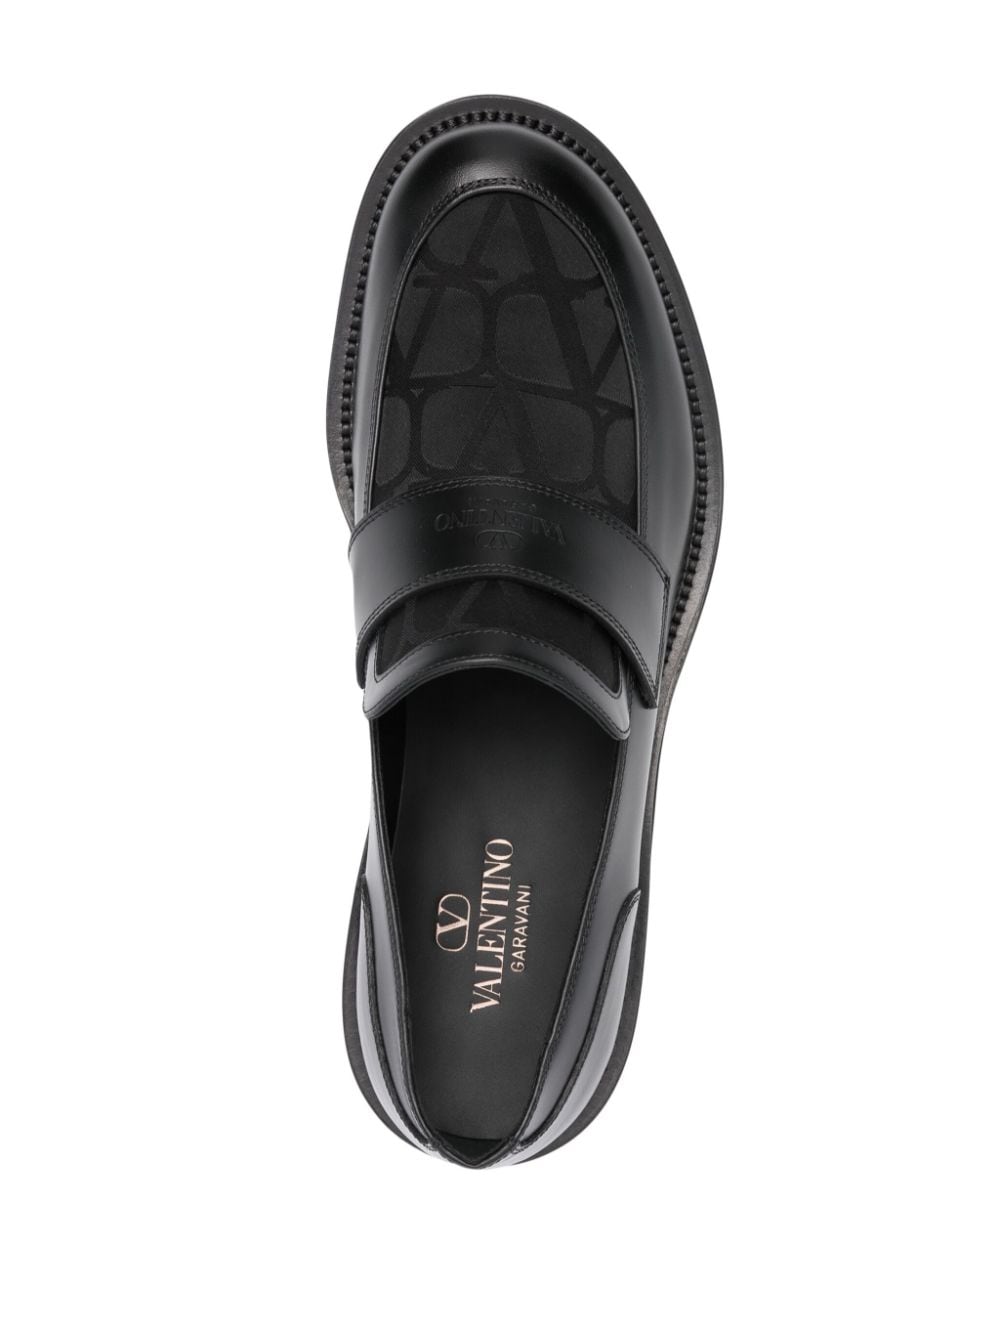 Toile Iconographe leather loafers<BR/><BR/><BR/>